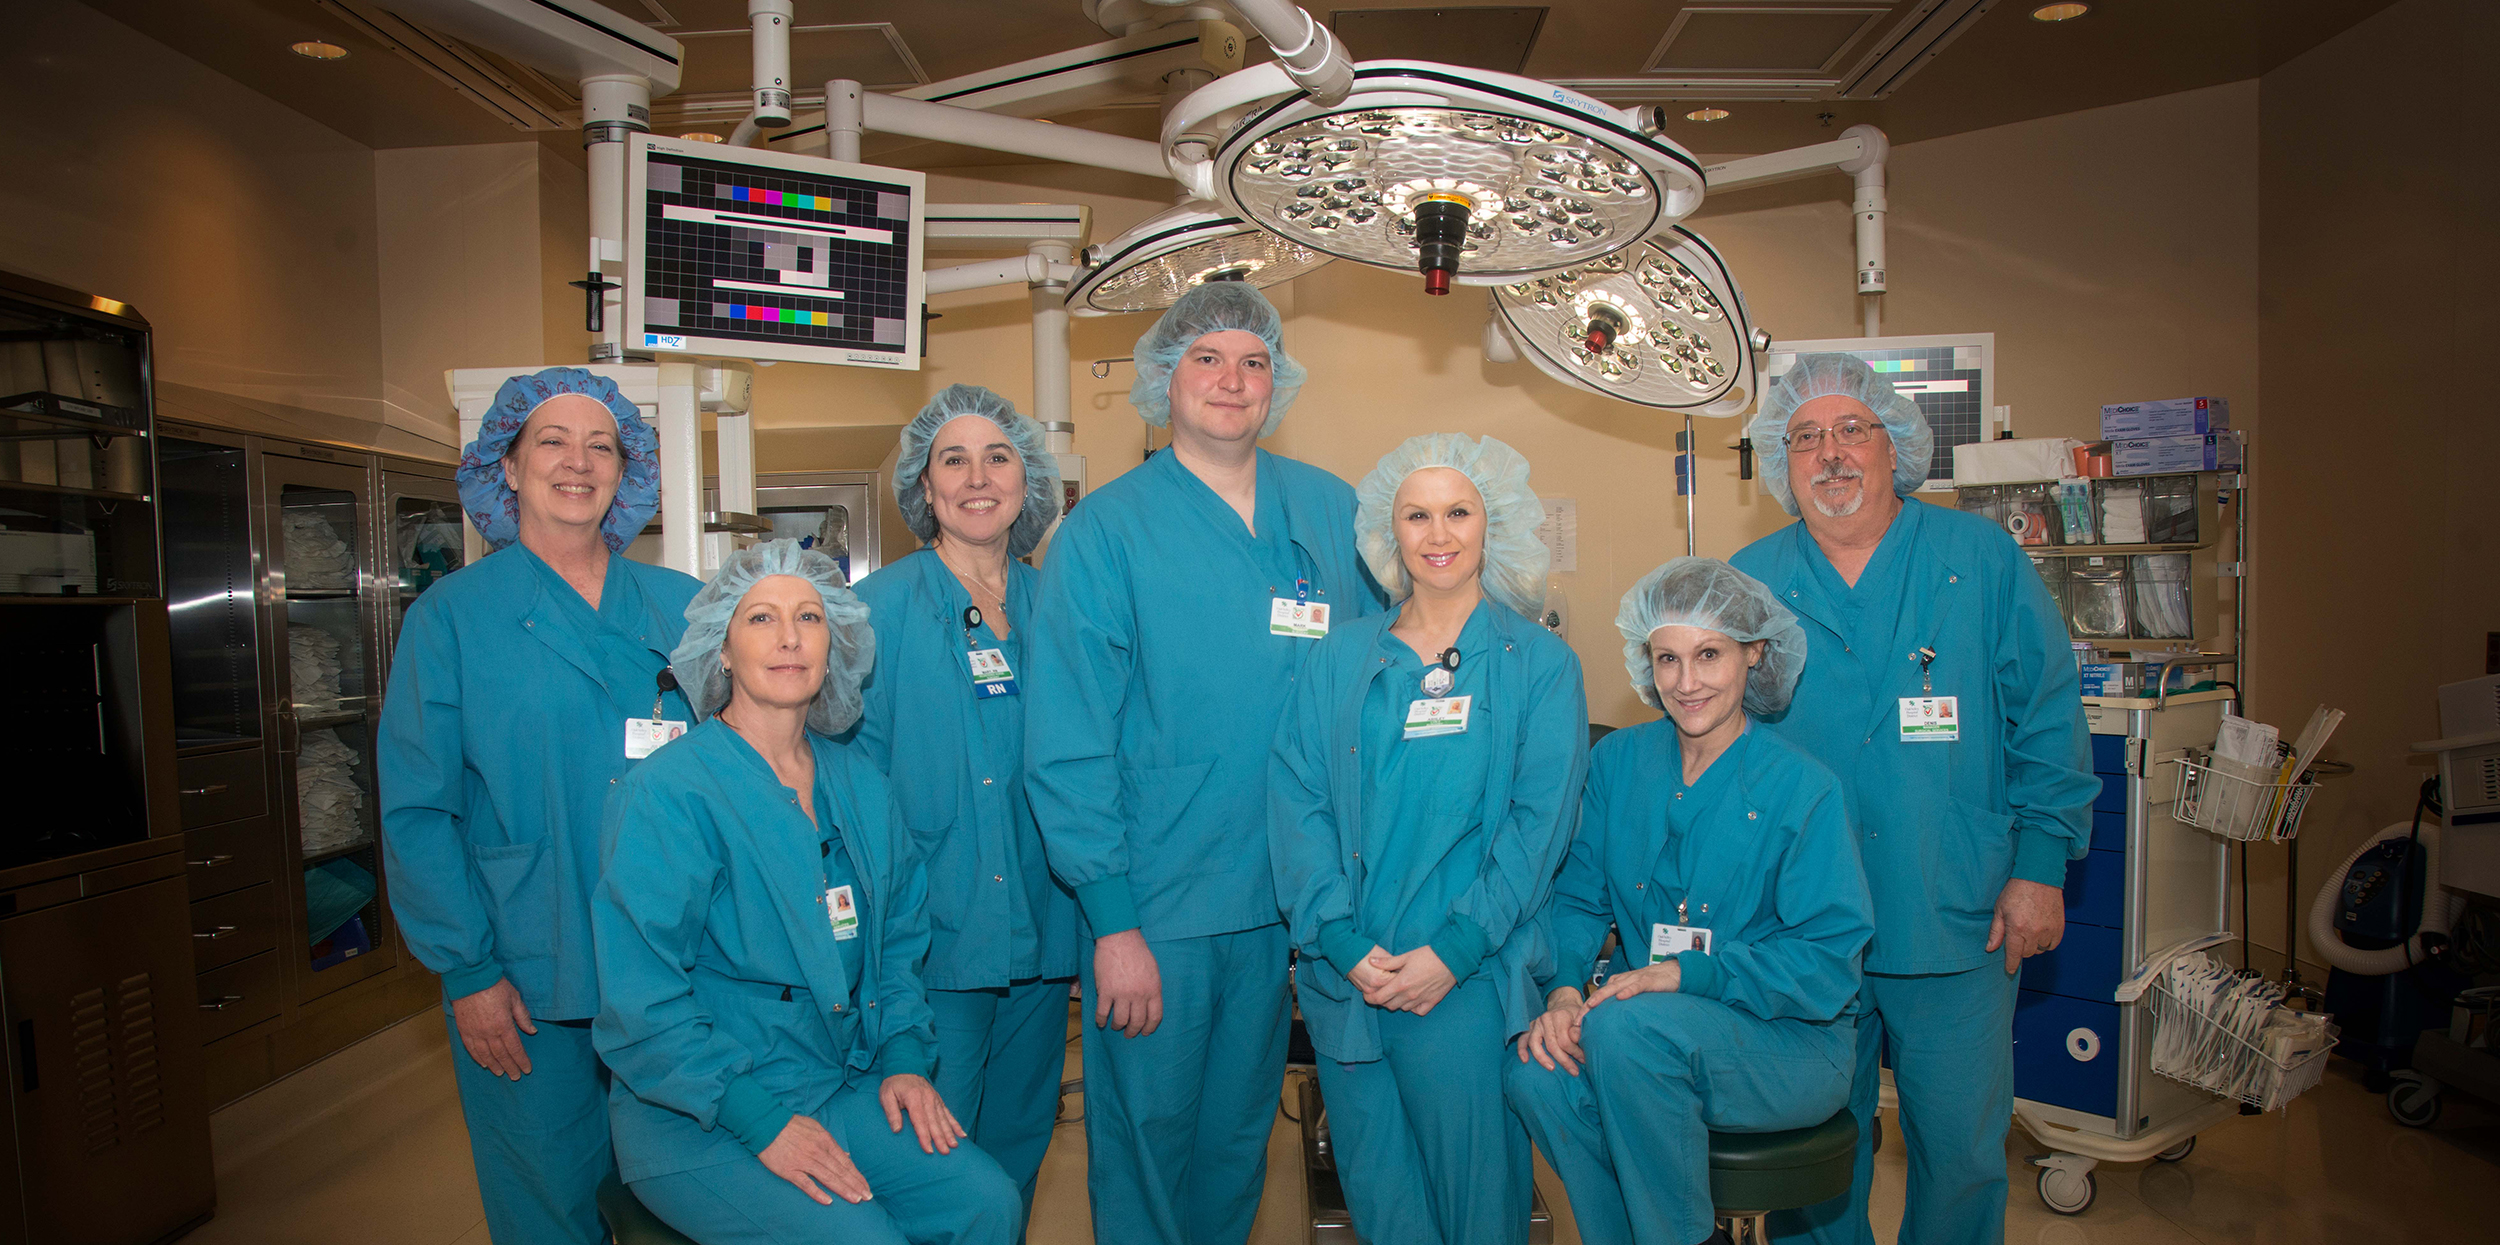 OR Surgery team picture